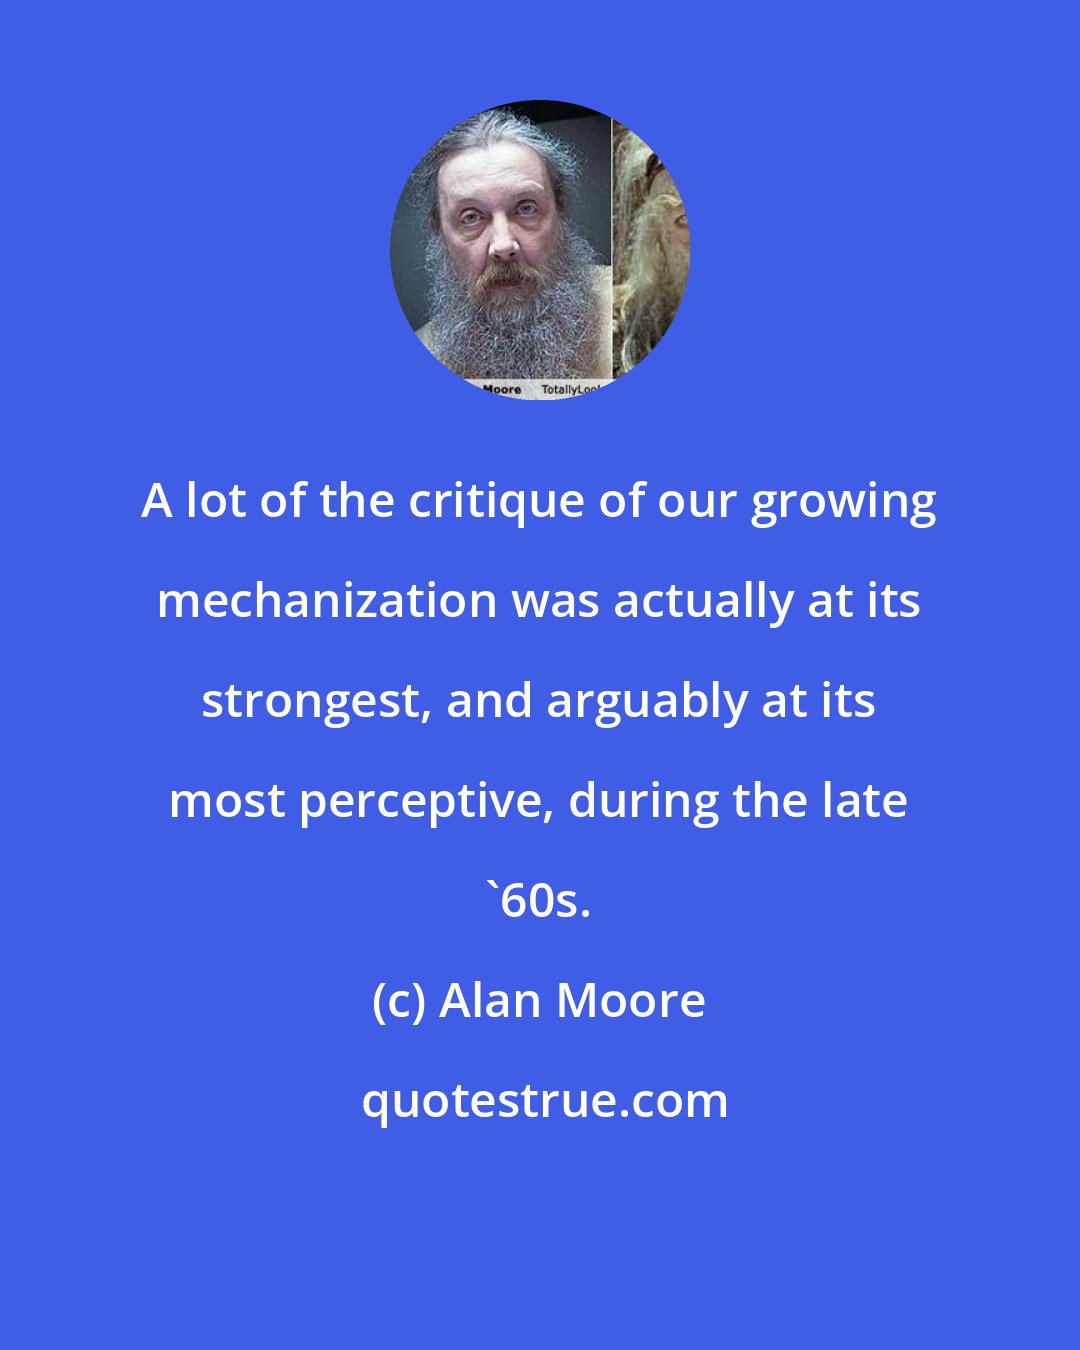 Alan Moore: A lot of the critique of our growing mechanization was actually at its strongest, and arguably at its most perceptive, during the late '60s.